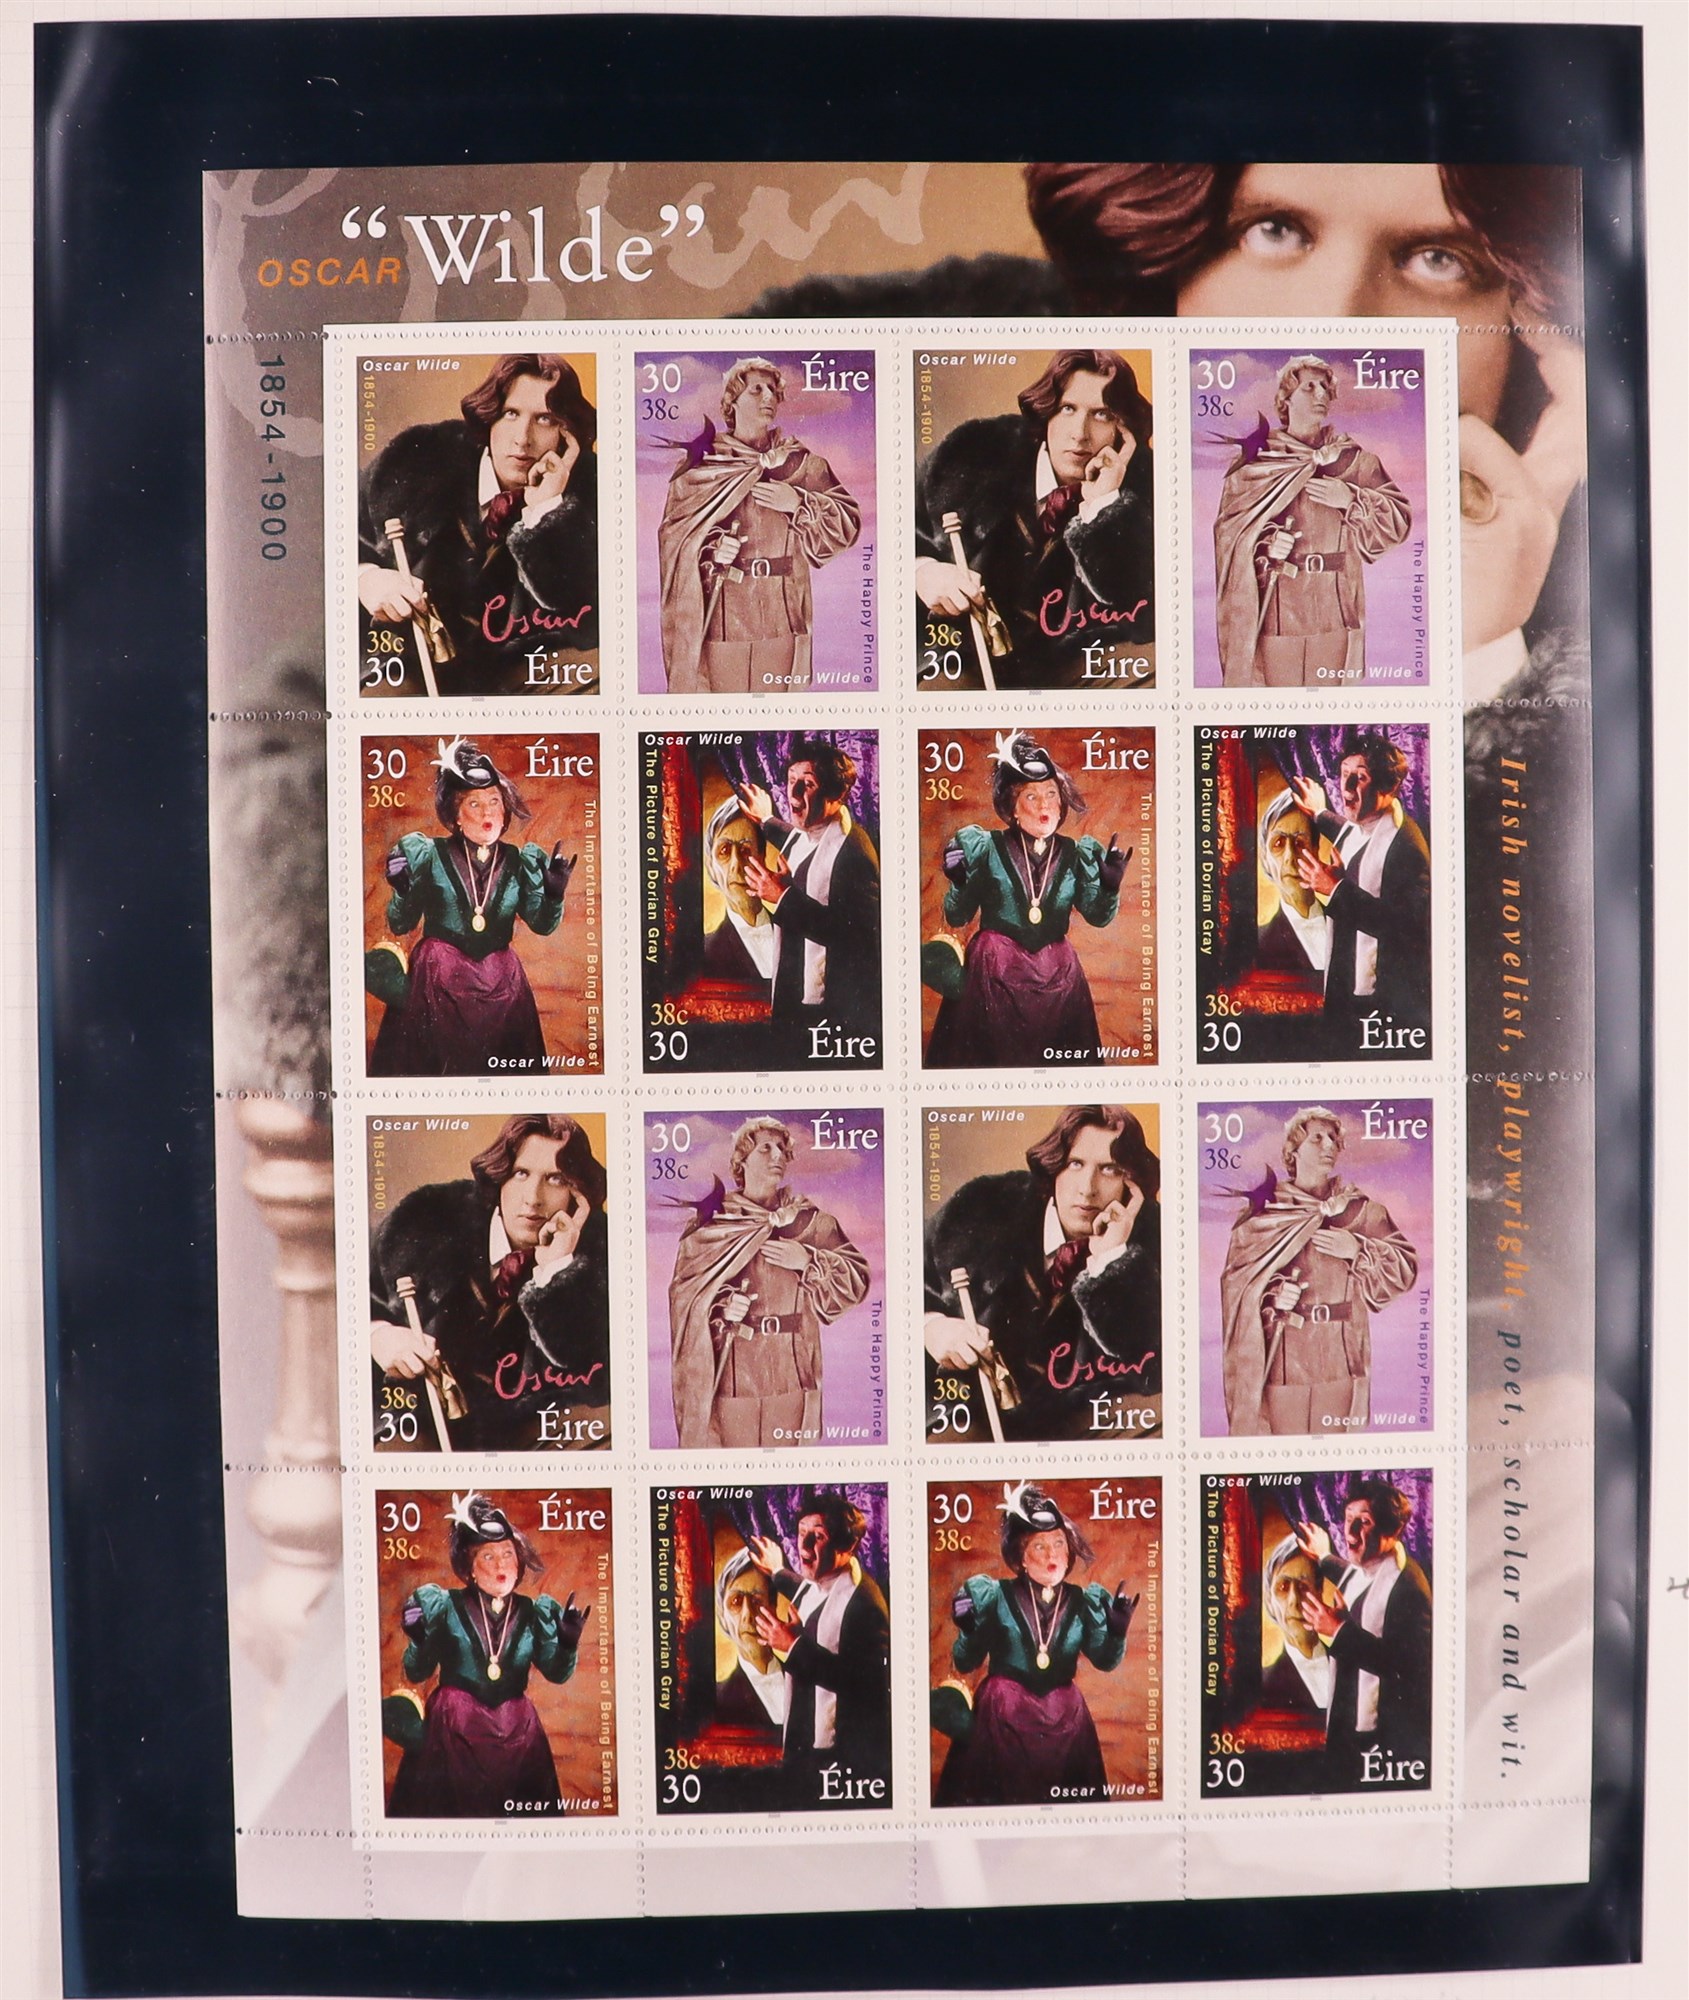 IRELAND 1988-2002 SHEETLETS NEVER HINGED MINT COLLECTION in album, stc 1,150 Euro. (85+ sheetlets) - Image 7 of 8